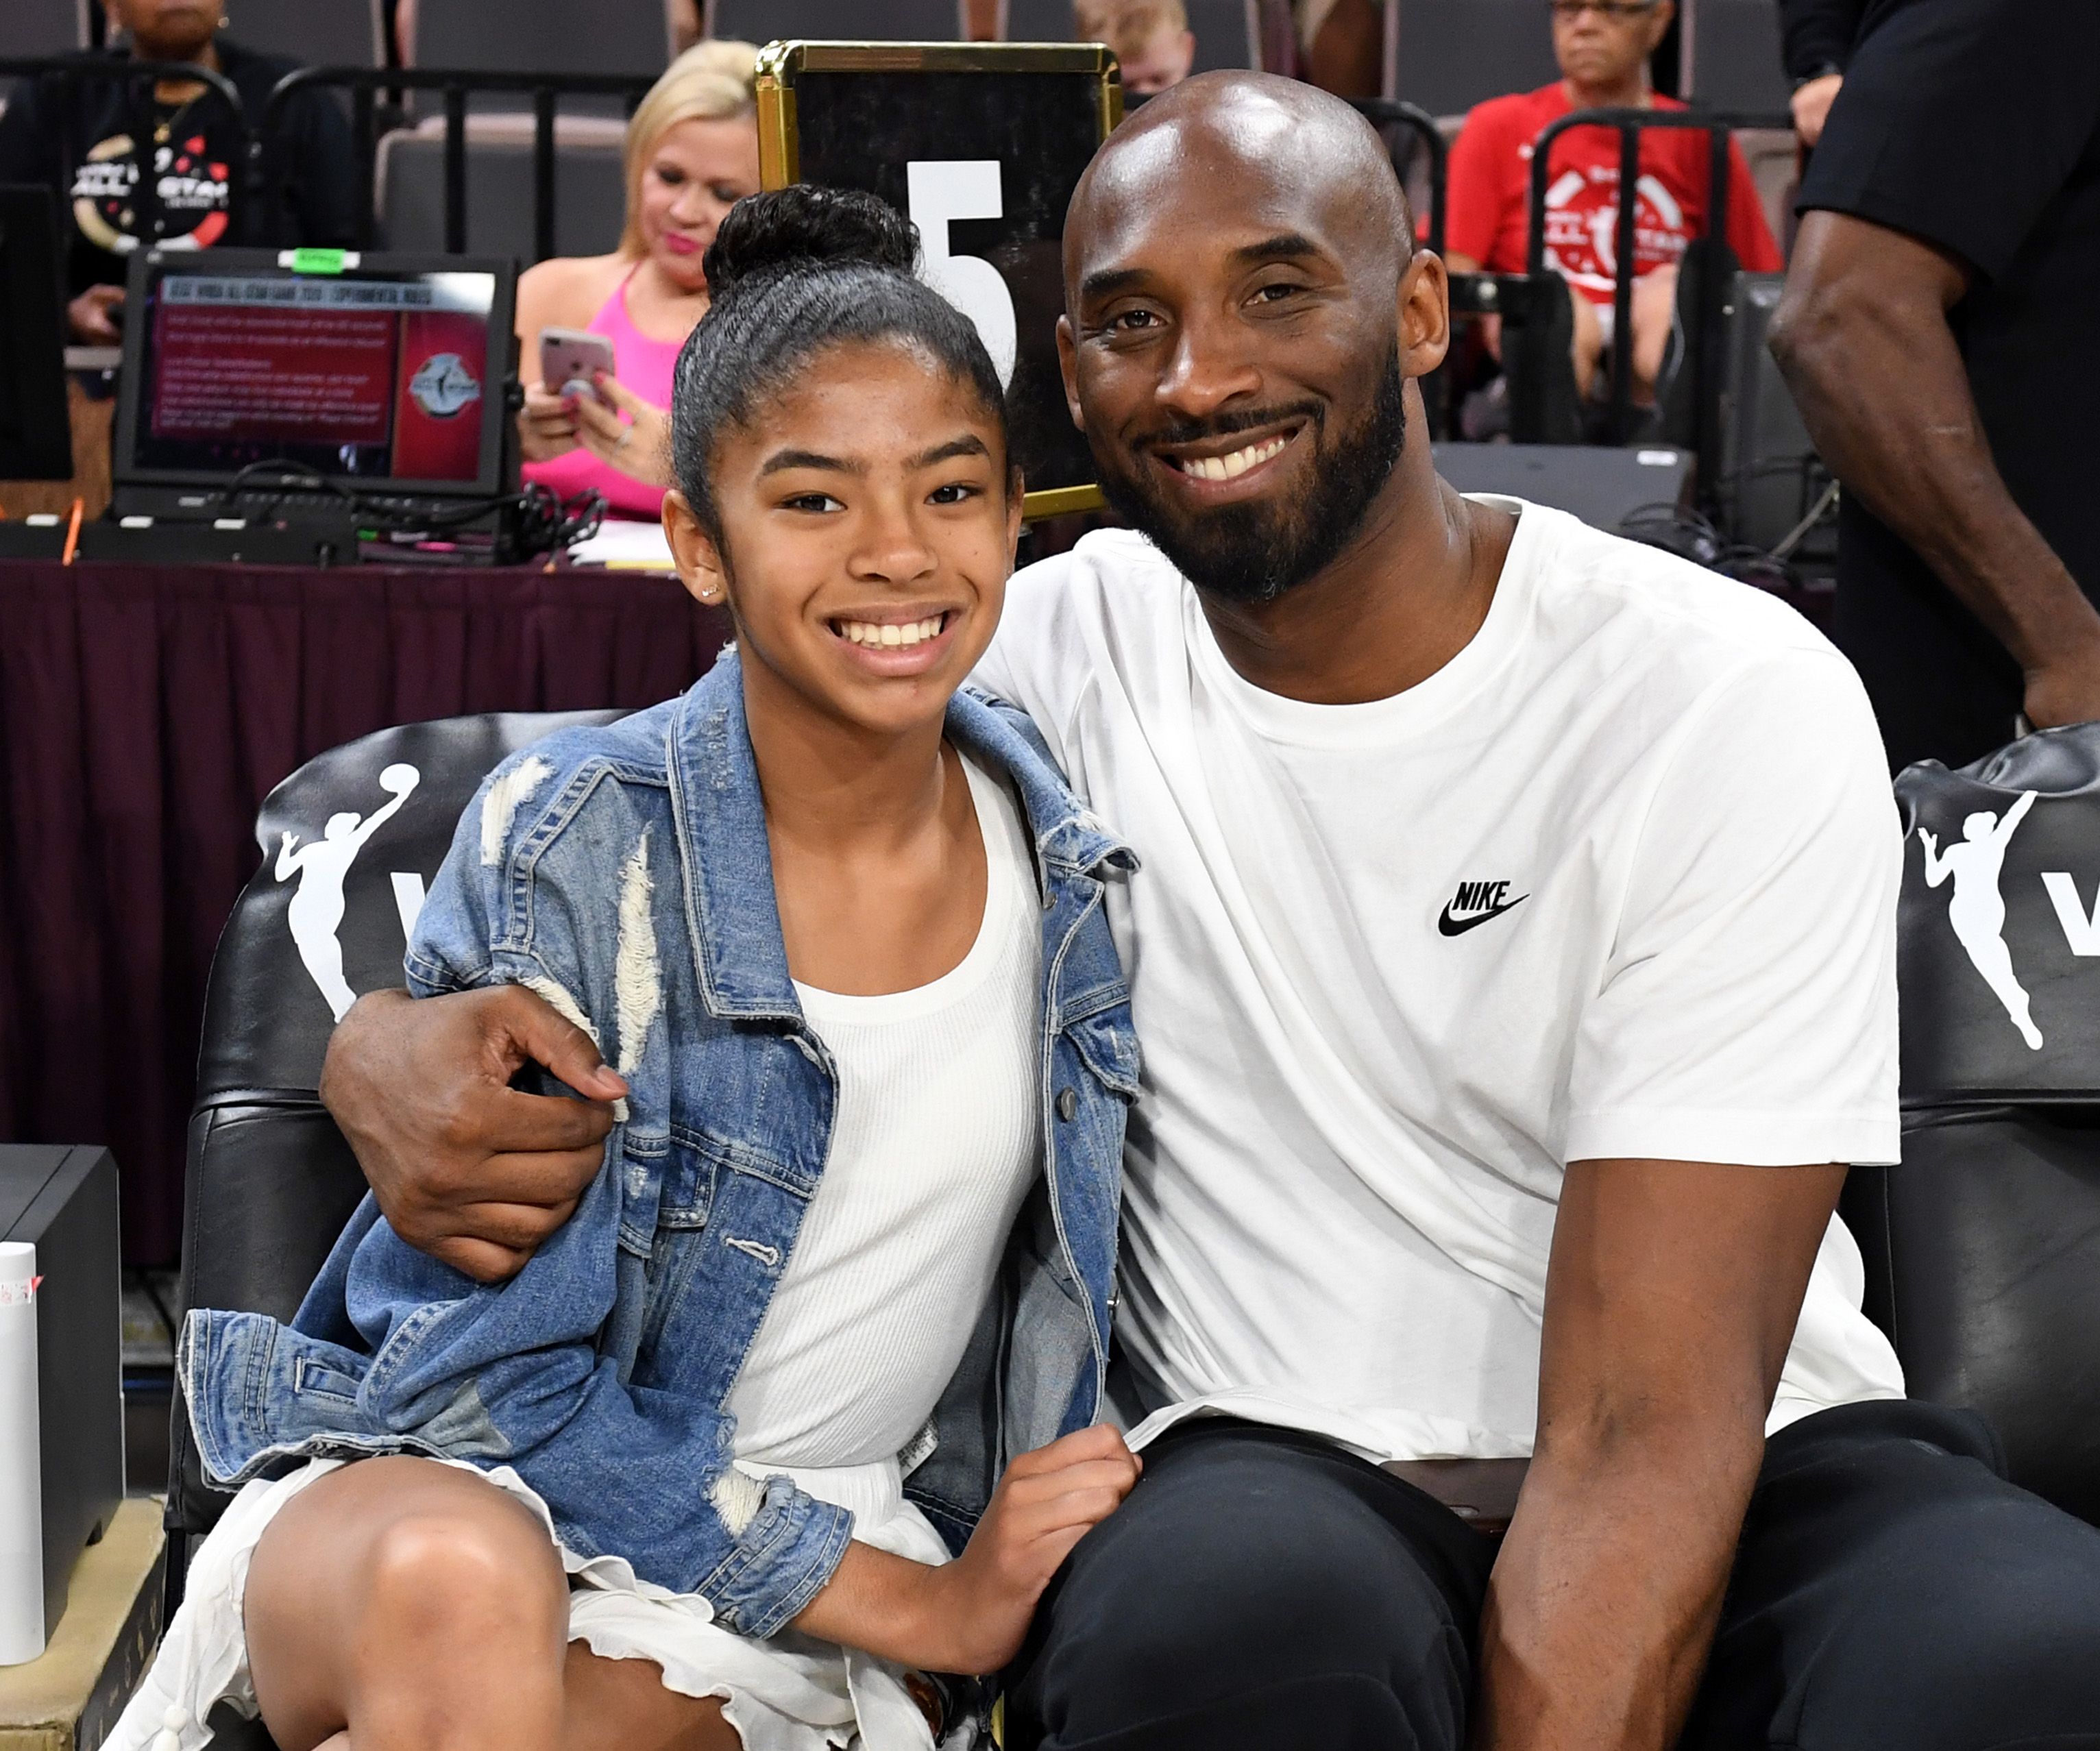 Gianna Bryant and her father, former NBA player Kobe Bryant, at the WNBA All-Star Game 2019 at the Mandalay Bay Events Center on July 27, 2019 | Photo: Getty Images